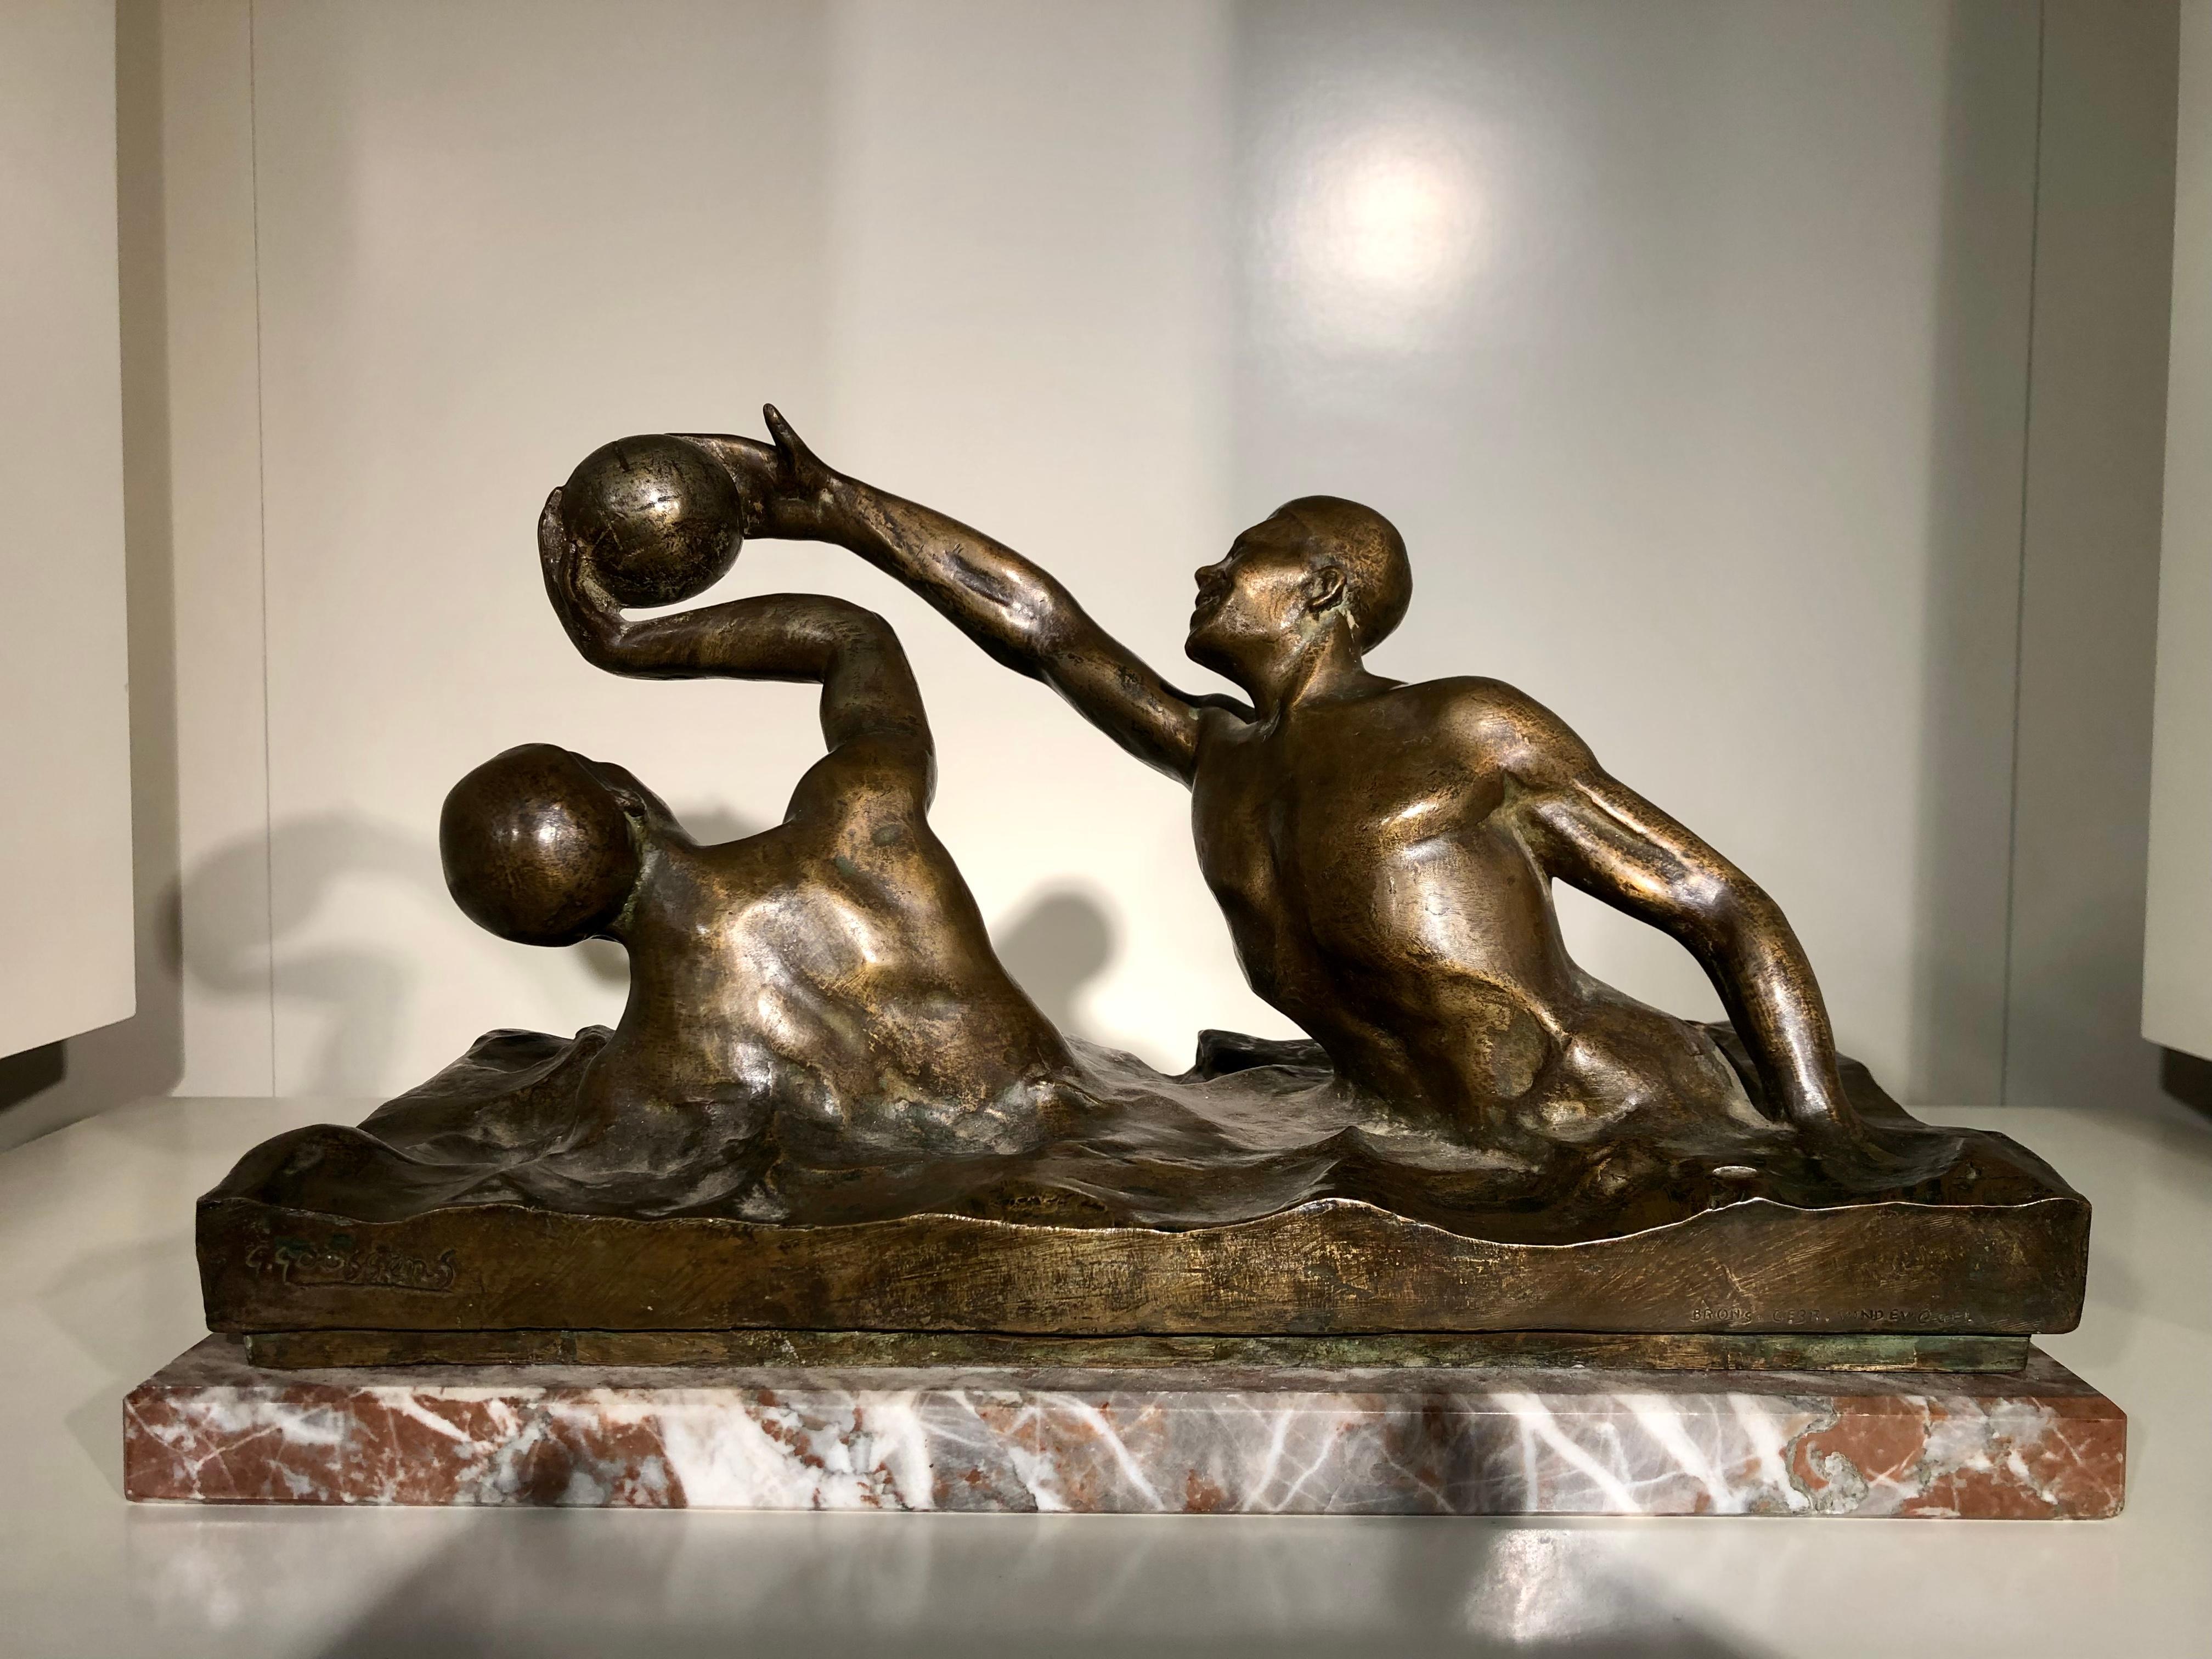 Bronze of 2 water polo players by G.Goossens with foundry mark of Vindenvogel on a marble base.
Water Sports subjects are rarely seen on the market.